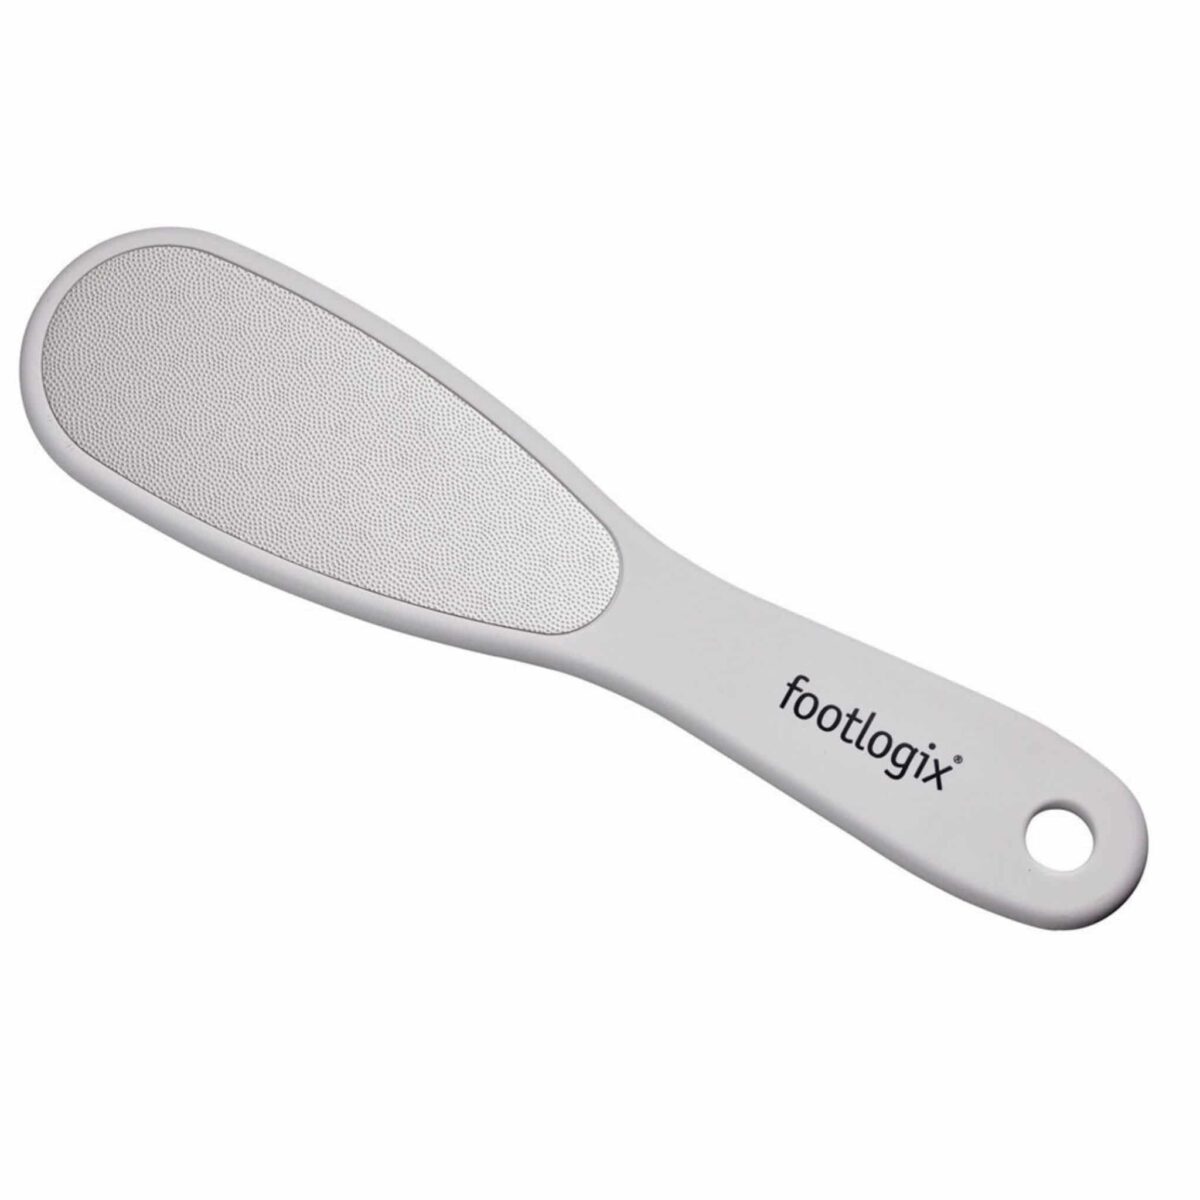 Footlogix Stainless Steel Pedicure Foot File Double Sided